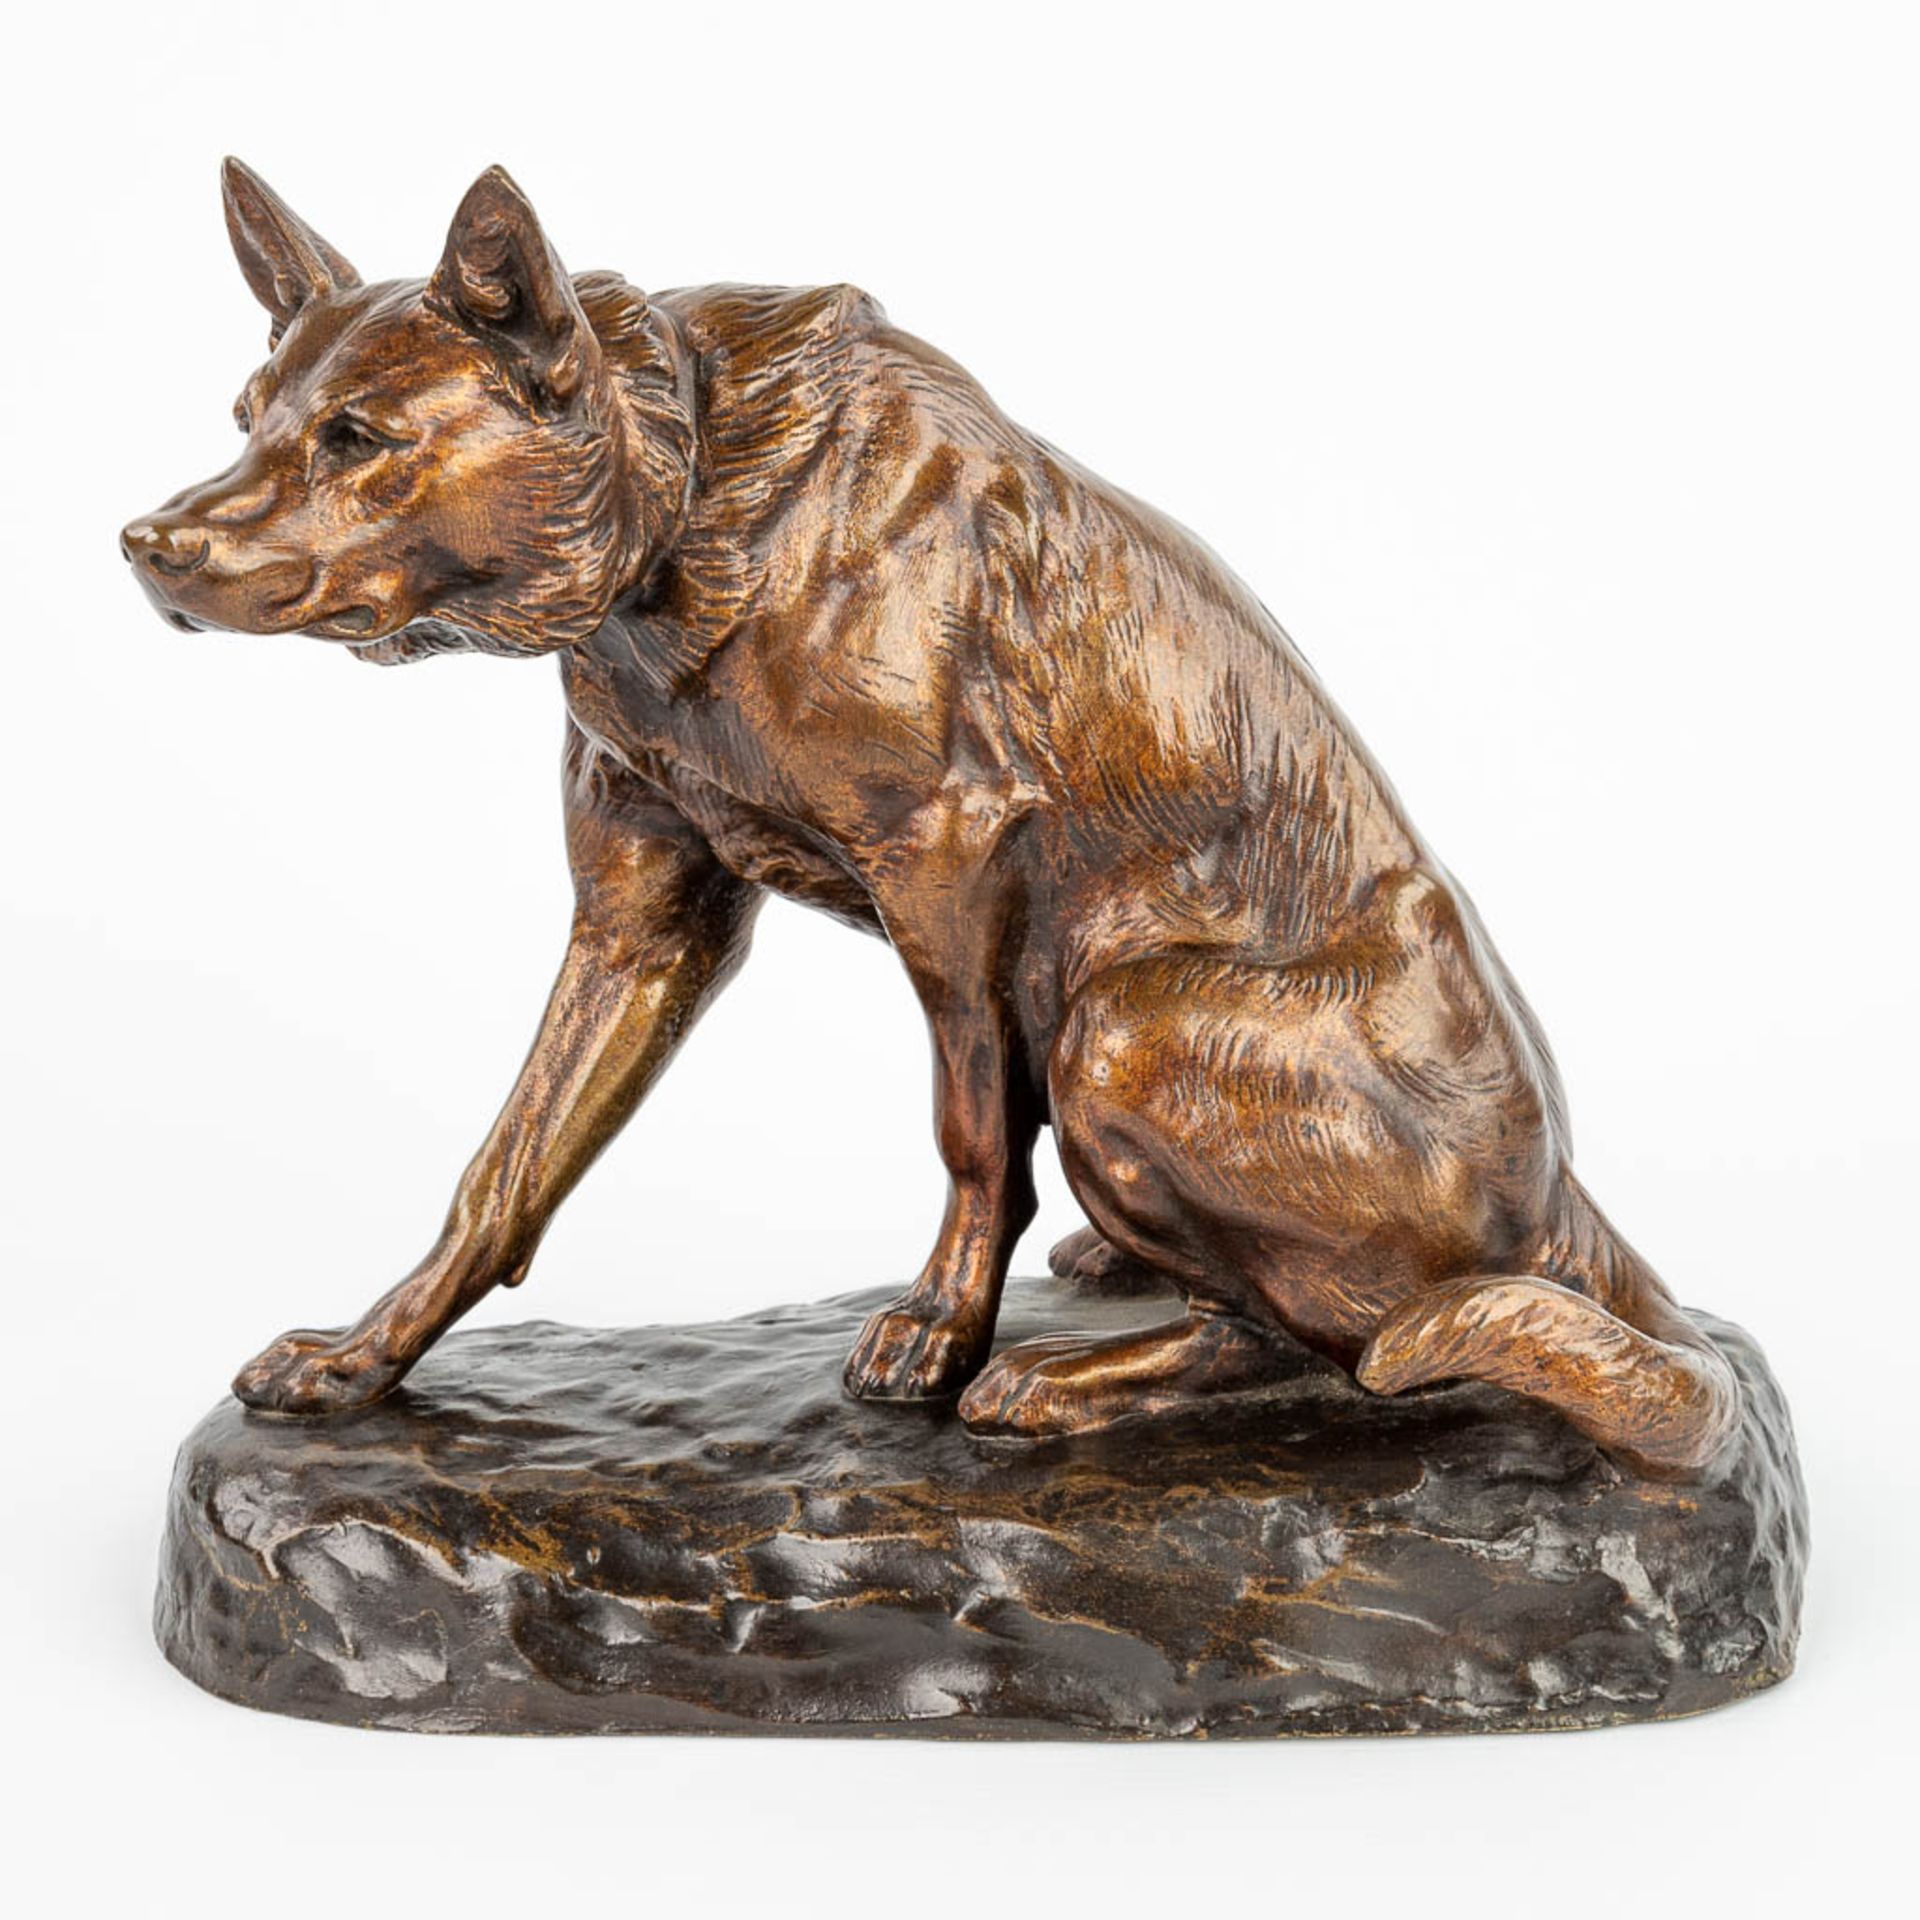 Louis RICHƒ (1877-1949) German Shephard, a bronze statue of a seated dog with a foundry mark. (H:27c